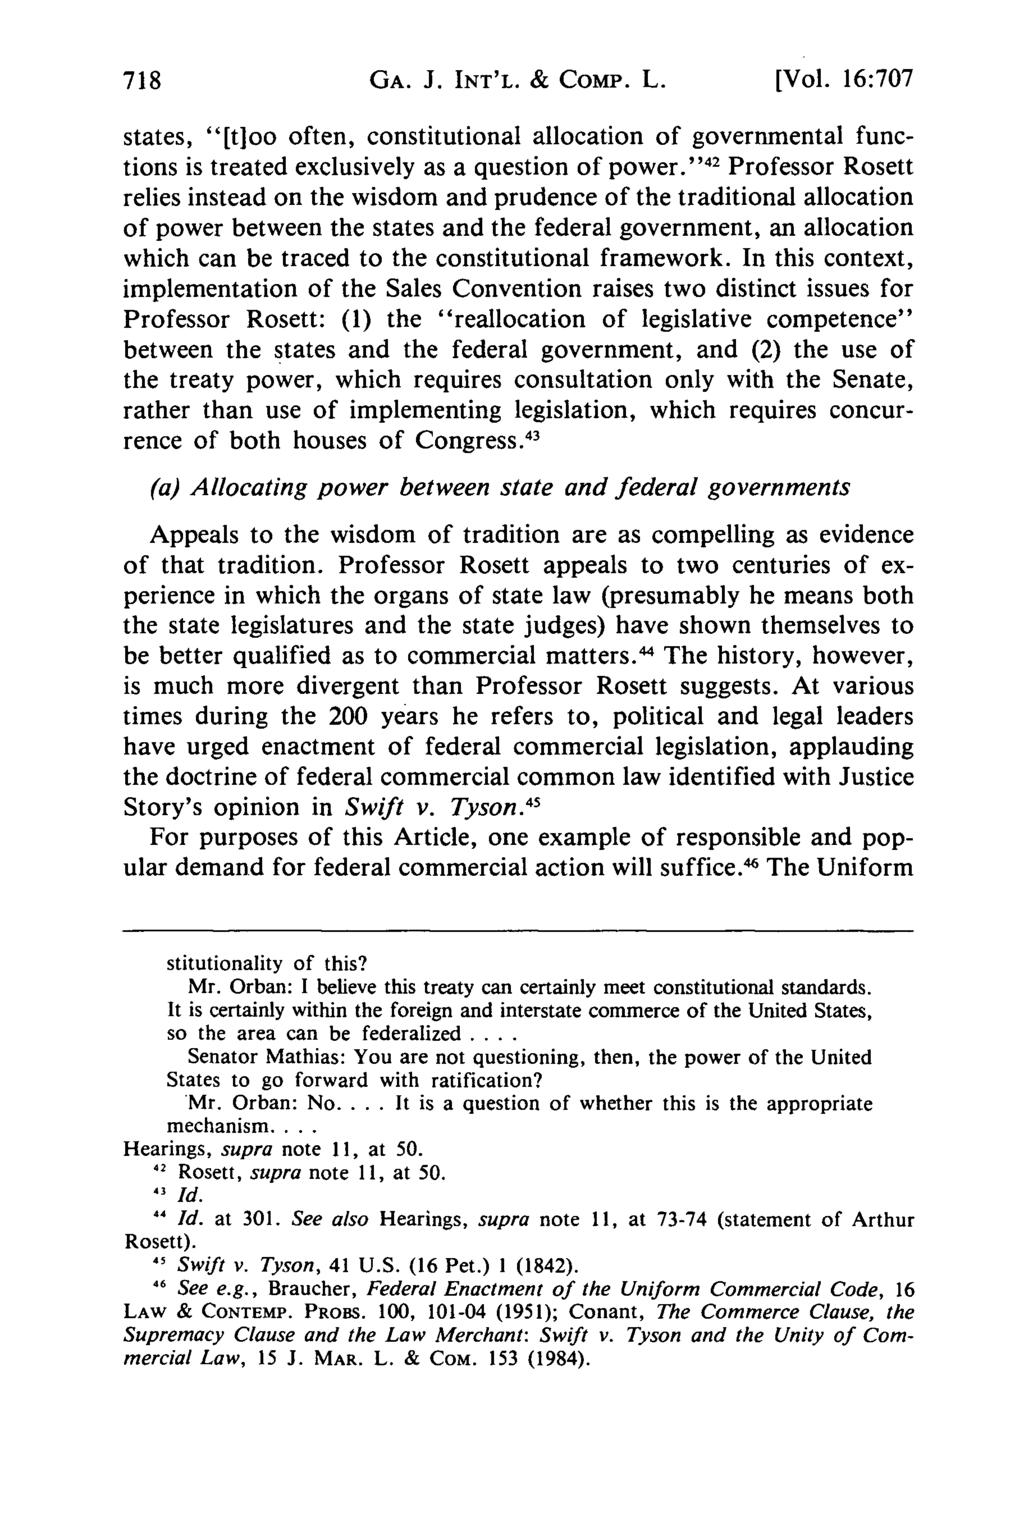 GA. J. INT'L. & COMP. L. [Vol. 16:707 states, "[too often, constitutional allocation of governmental functions is treated exclusively as a question of power.